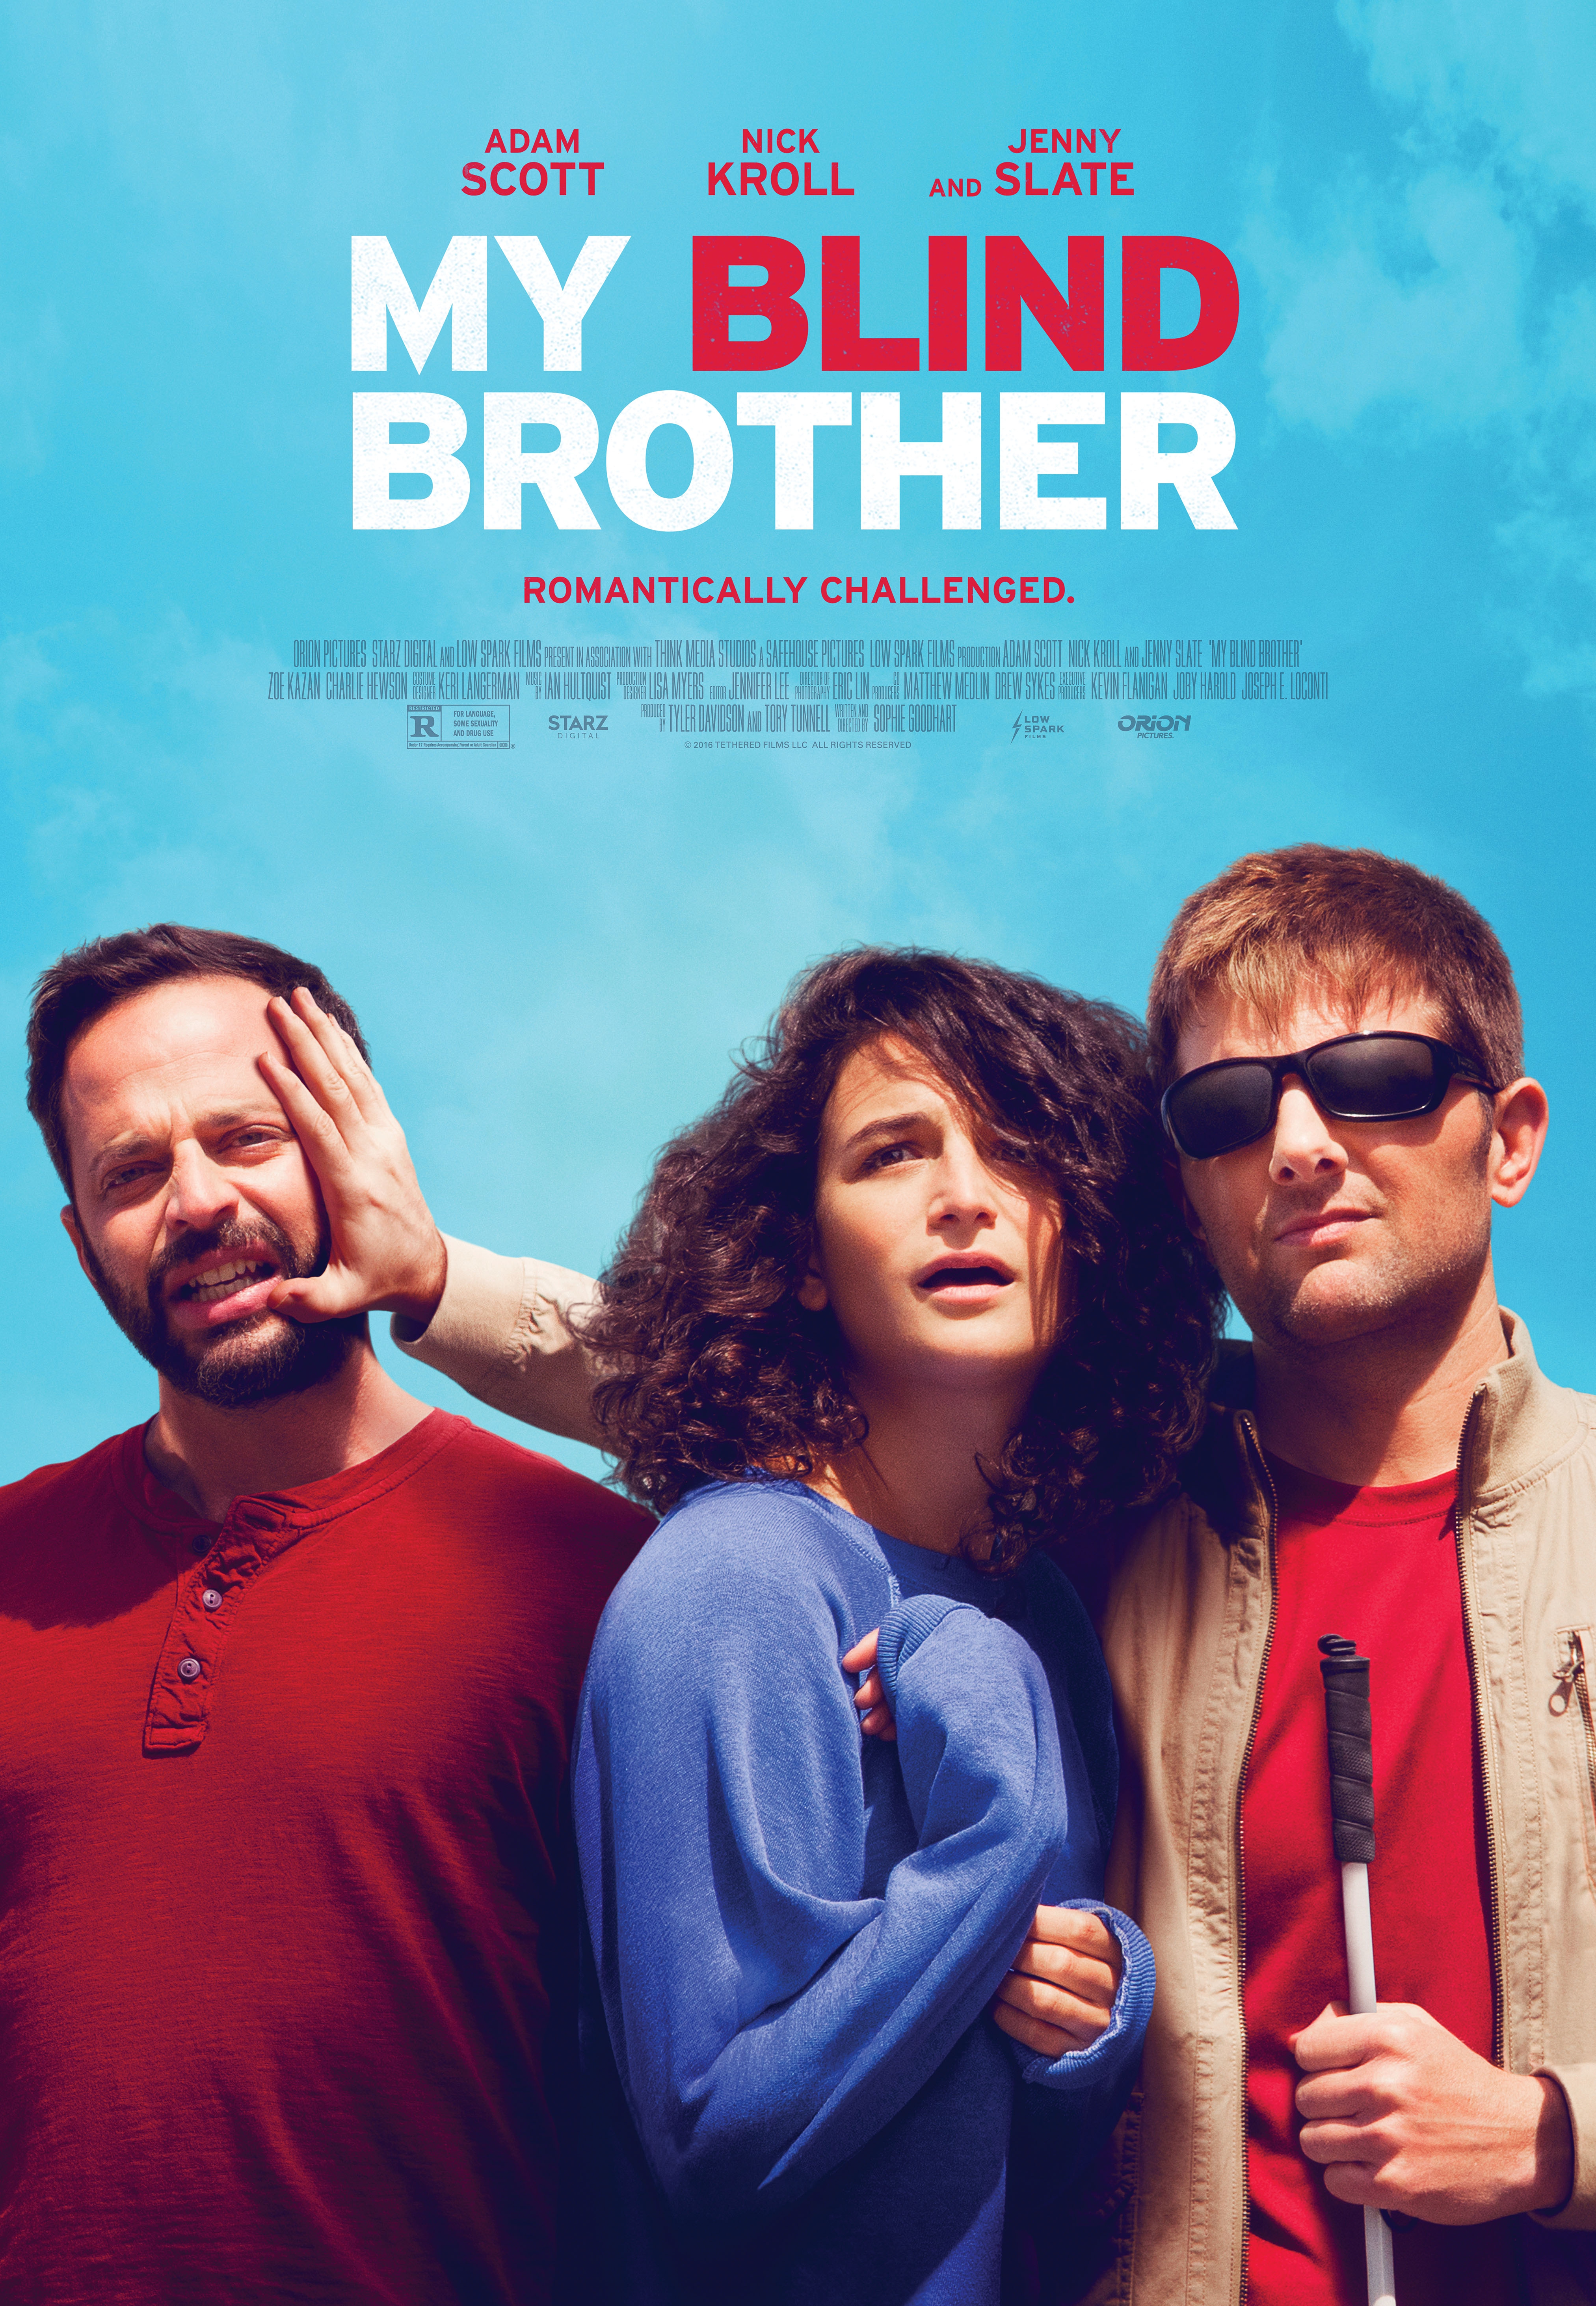  My Blind Brother (2016) Poster 